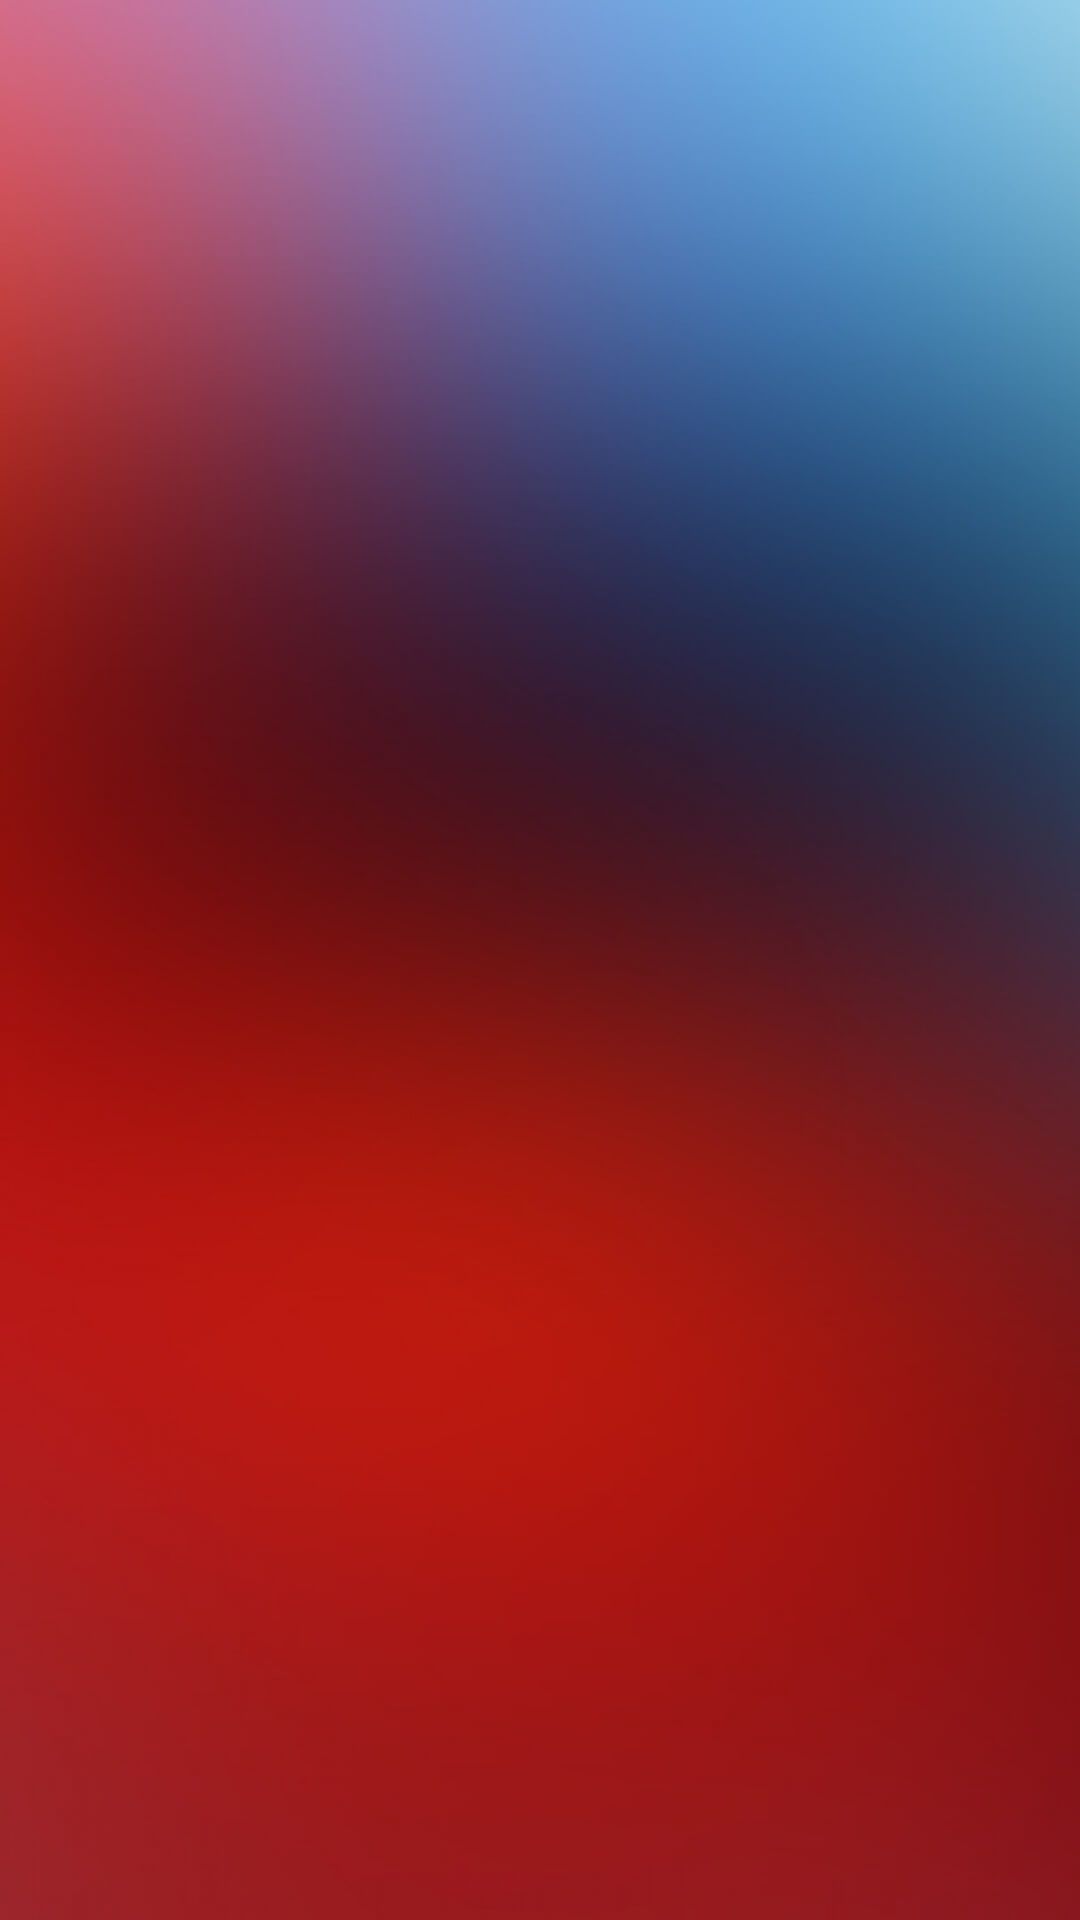 Abstract Red And White Android Background. Blue background image, Purple wallpaper, Purple wallpaper iphone